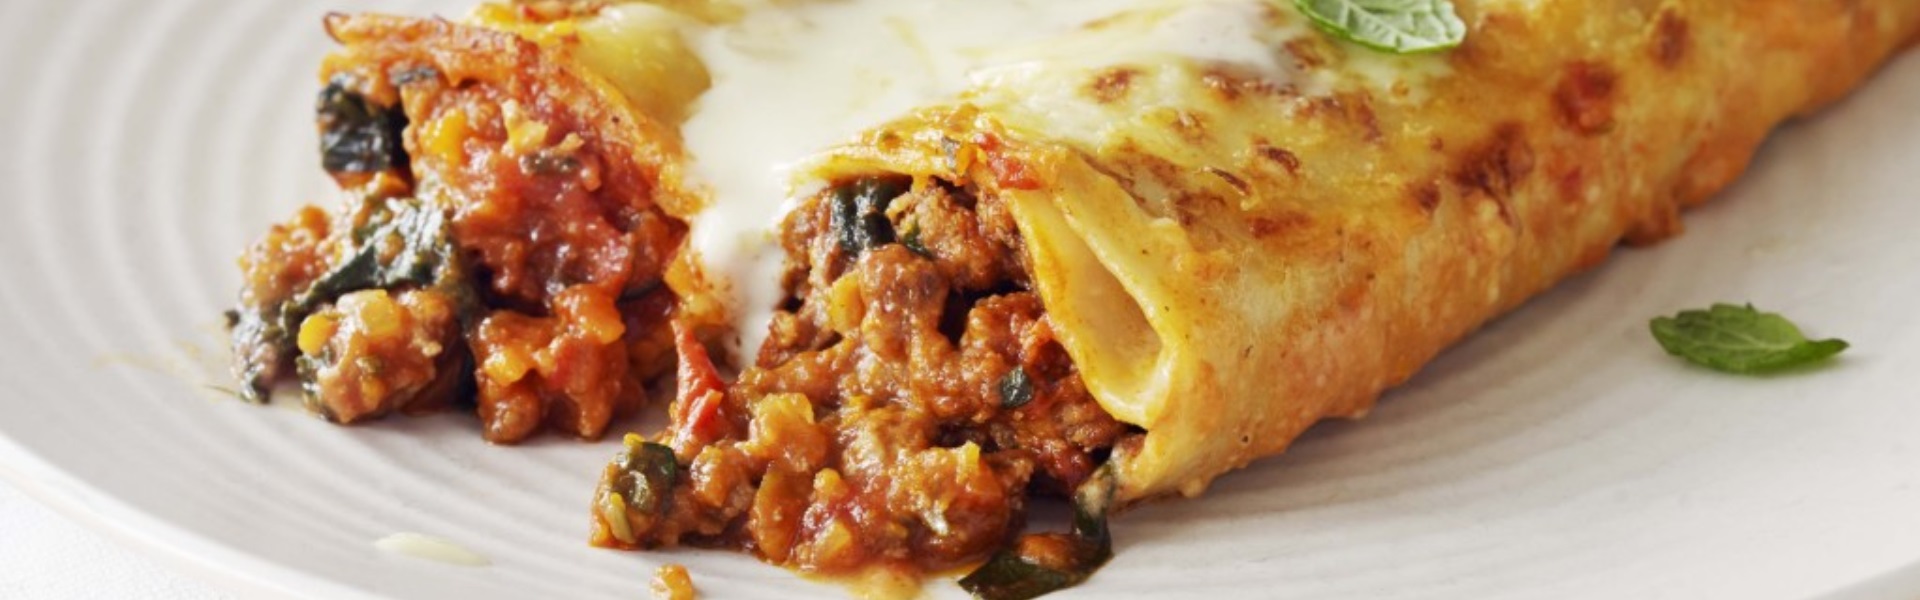 Cannelloni with minced meat